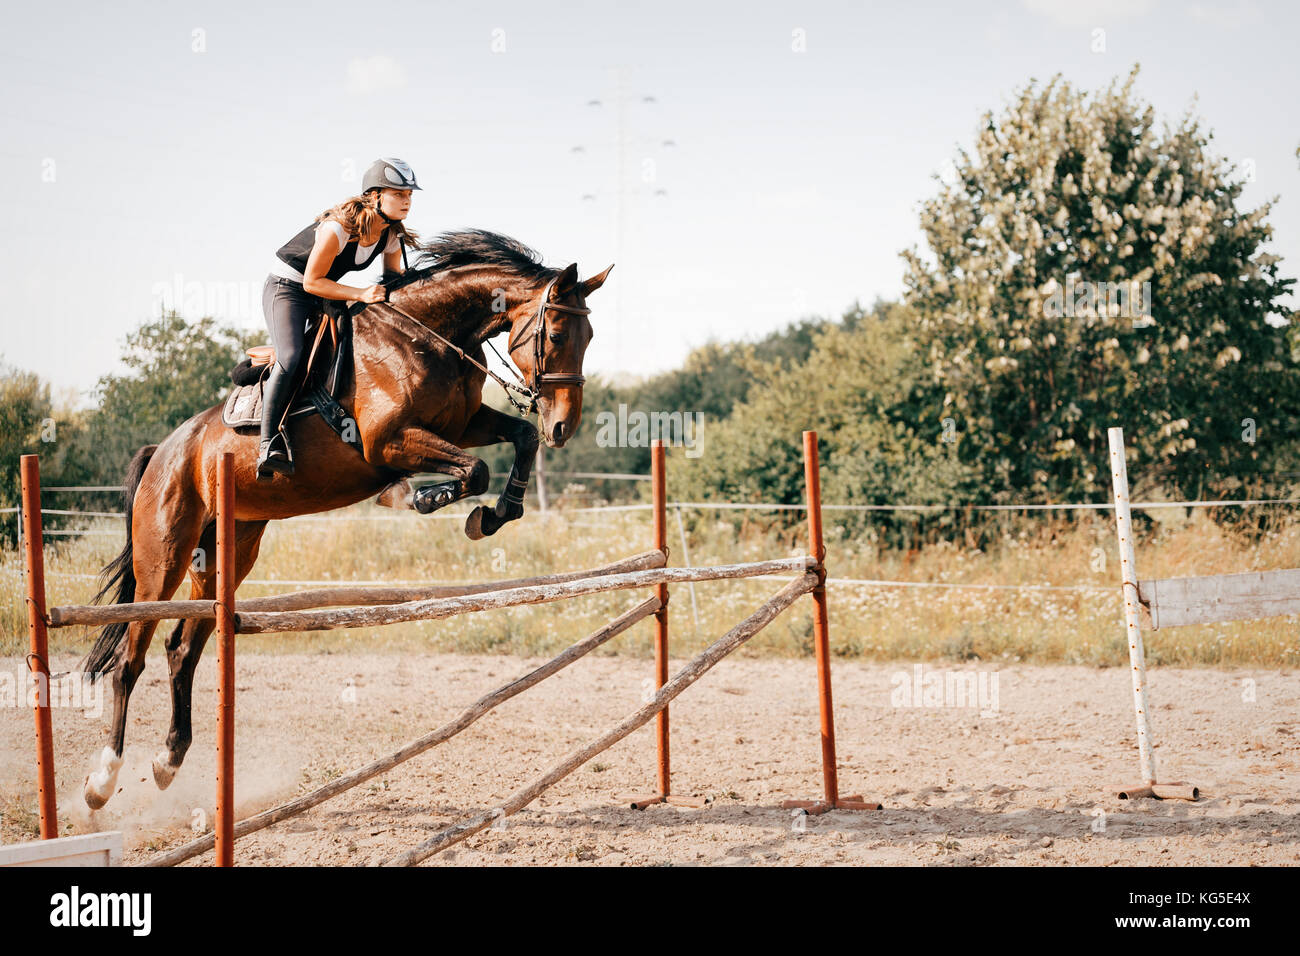 Young female jockey on horse leaping over hurdle Stock Photo